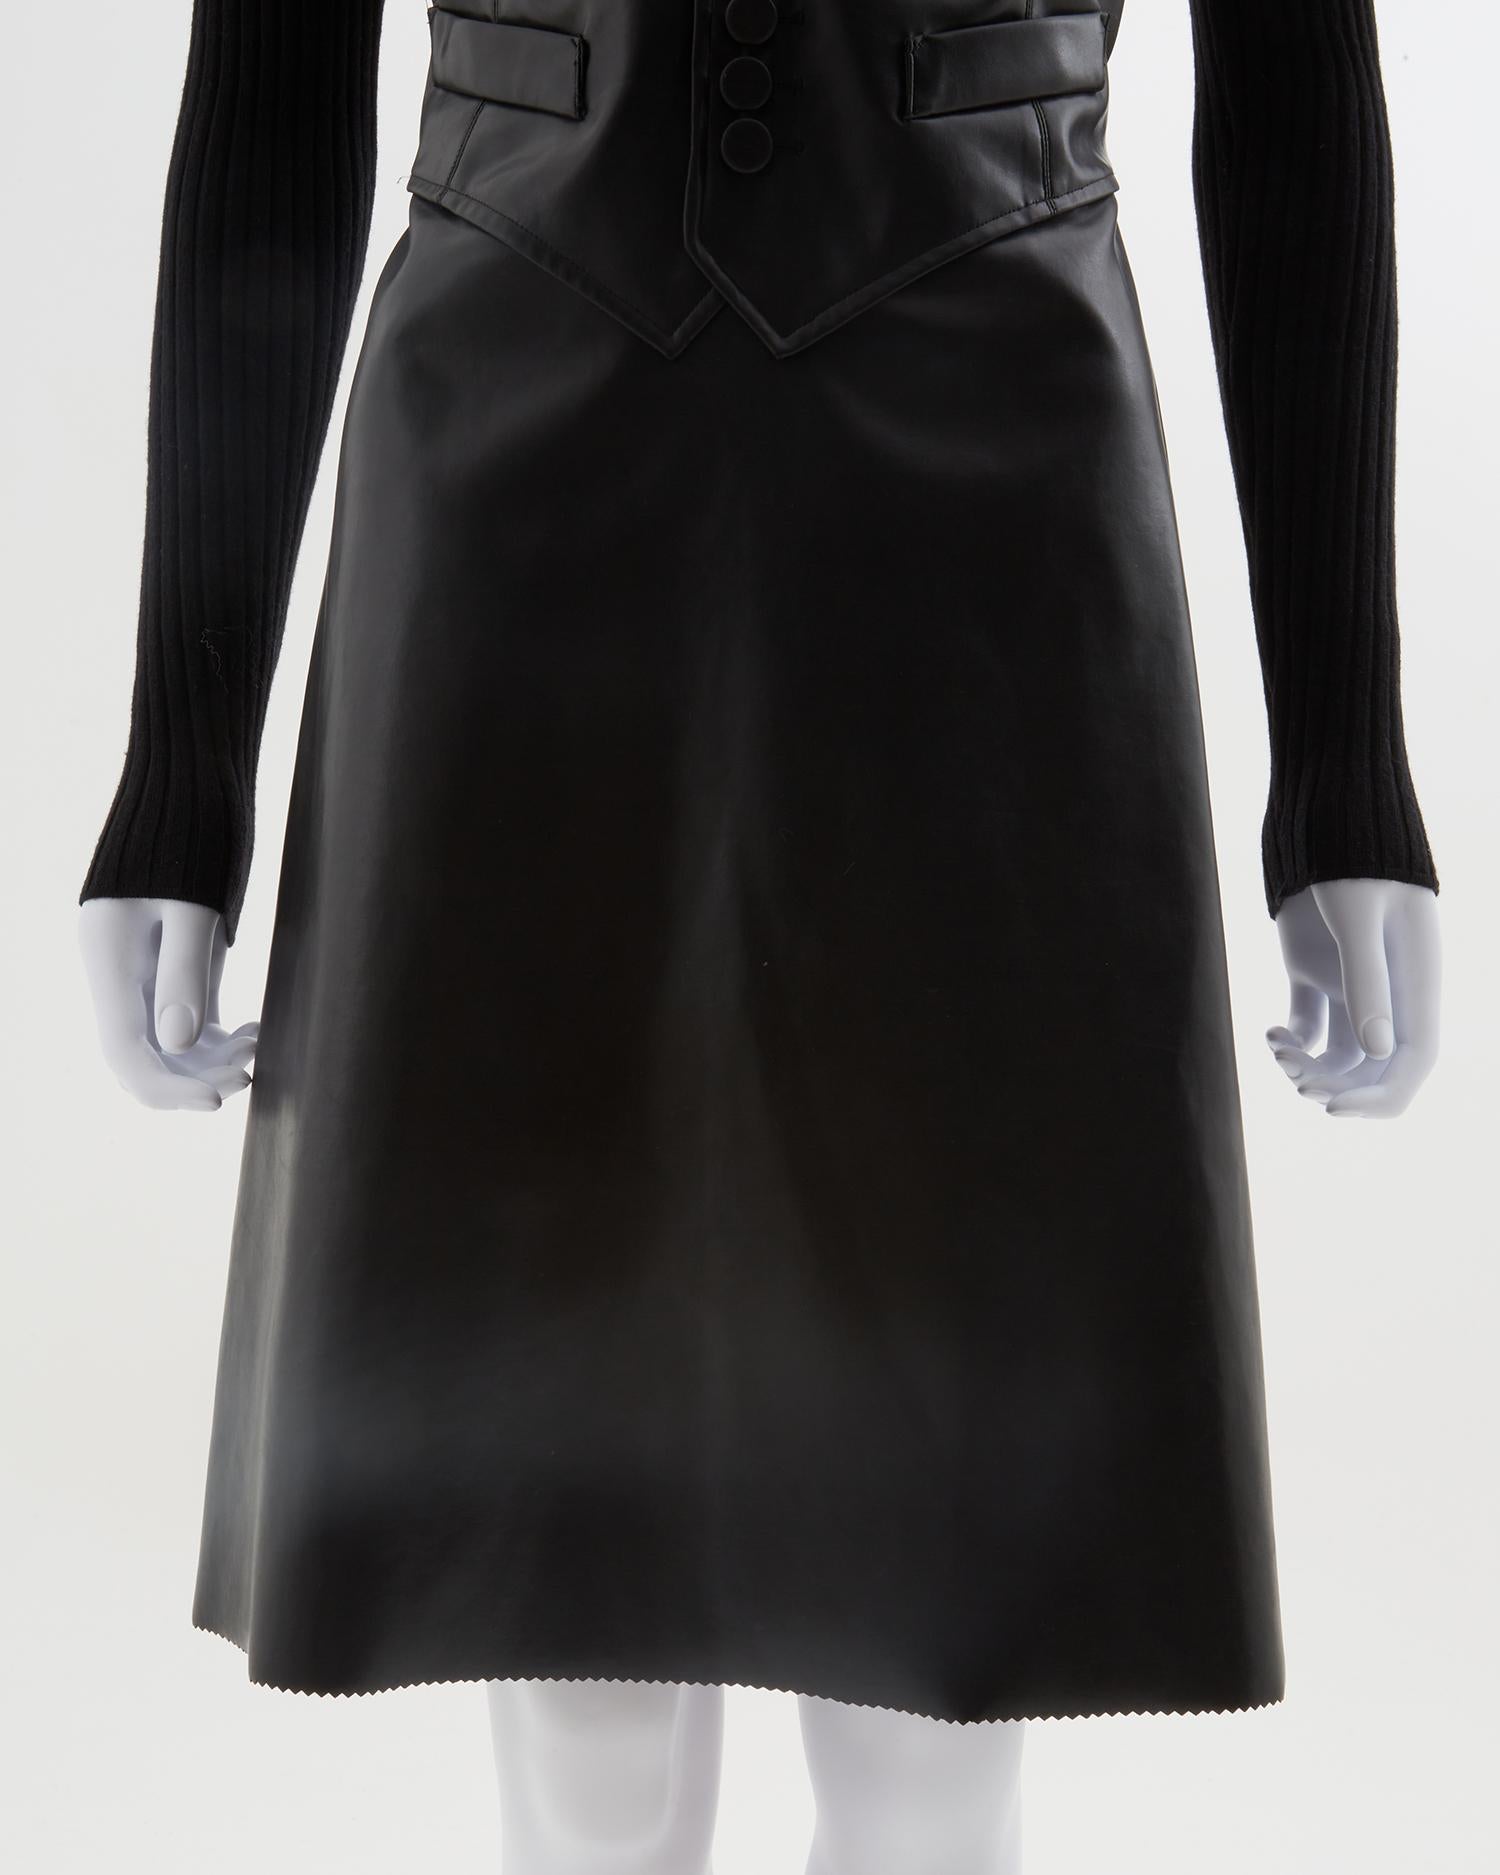 Jean Paul Gaultier black vegan leather & ribbed knit high-neck wool dress, ealry For Sale 6